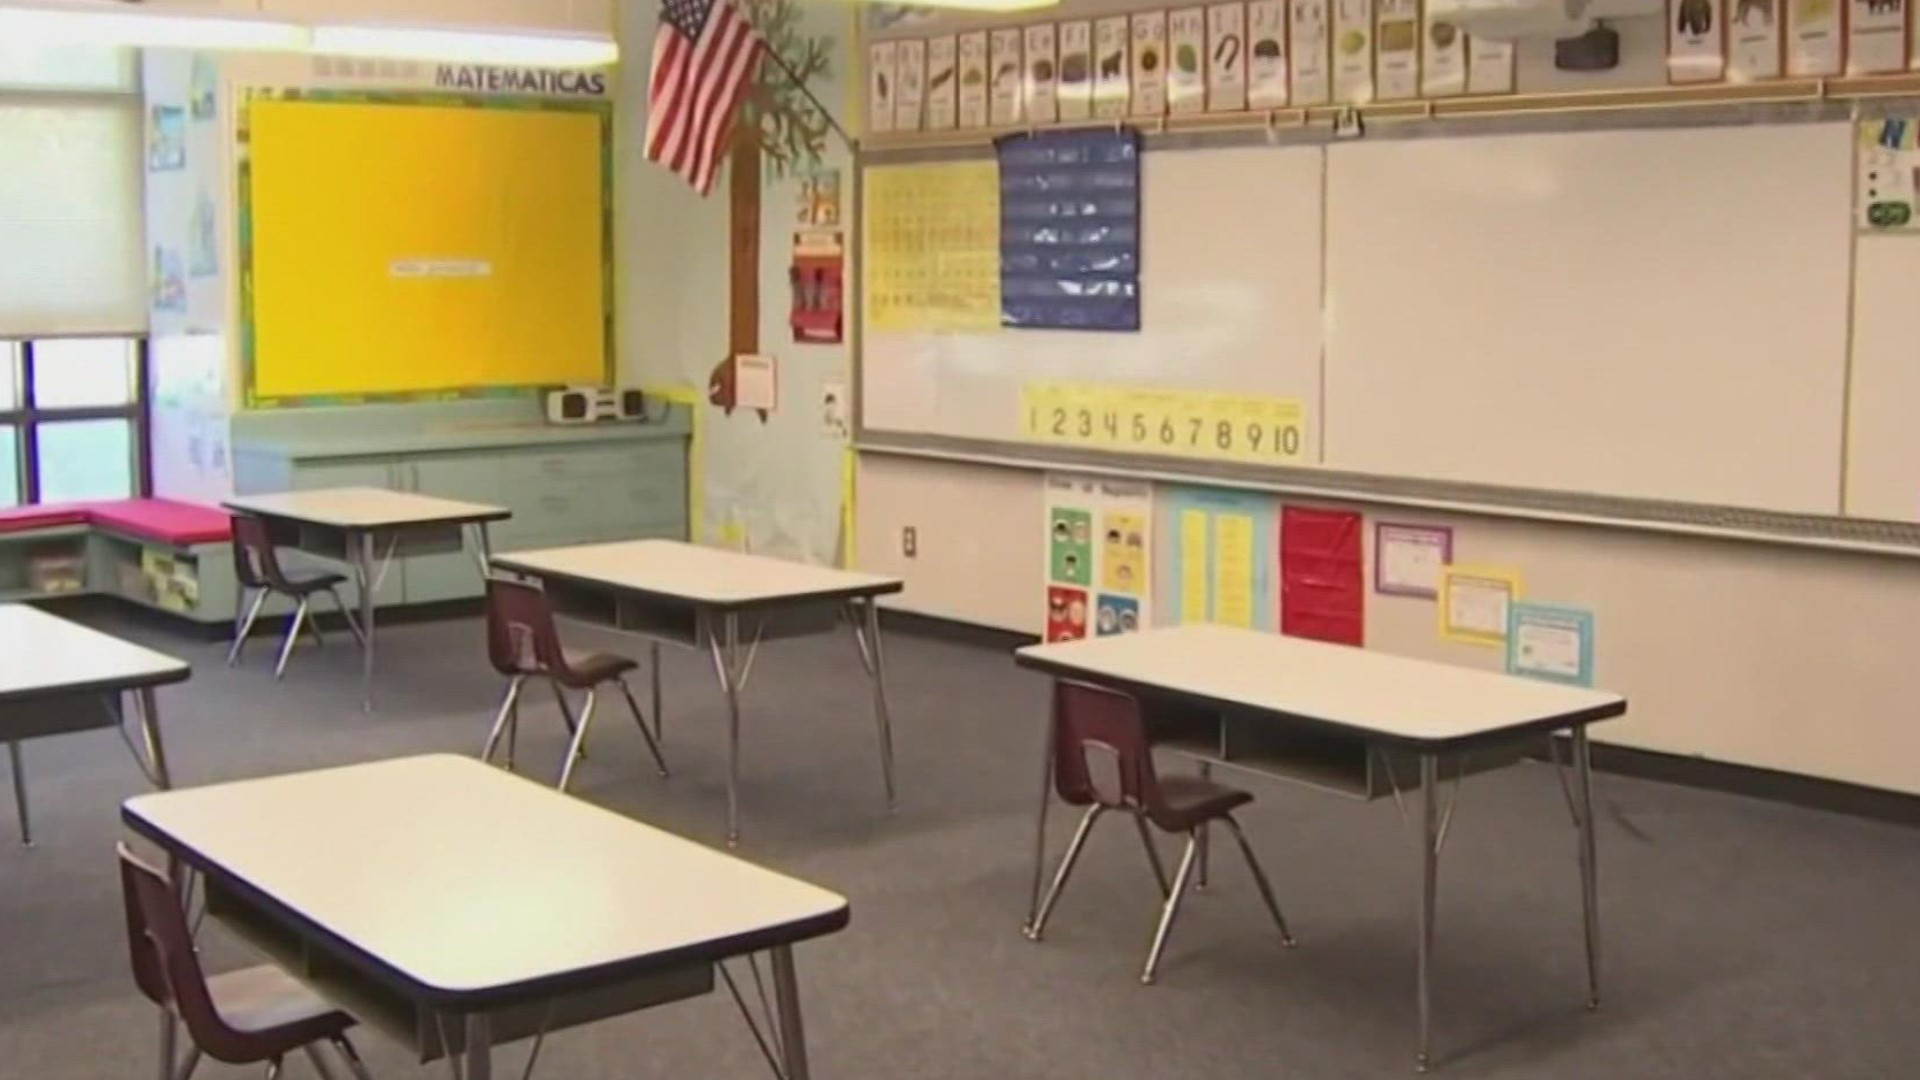 A measure being considered would give parents influence over what's being taught in classrooms. Lawmakers will discuss the bill Tuesday.